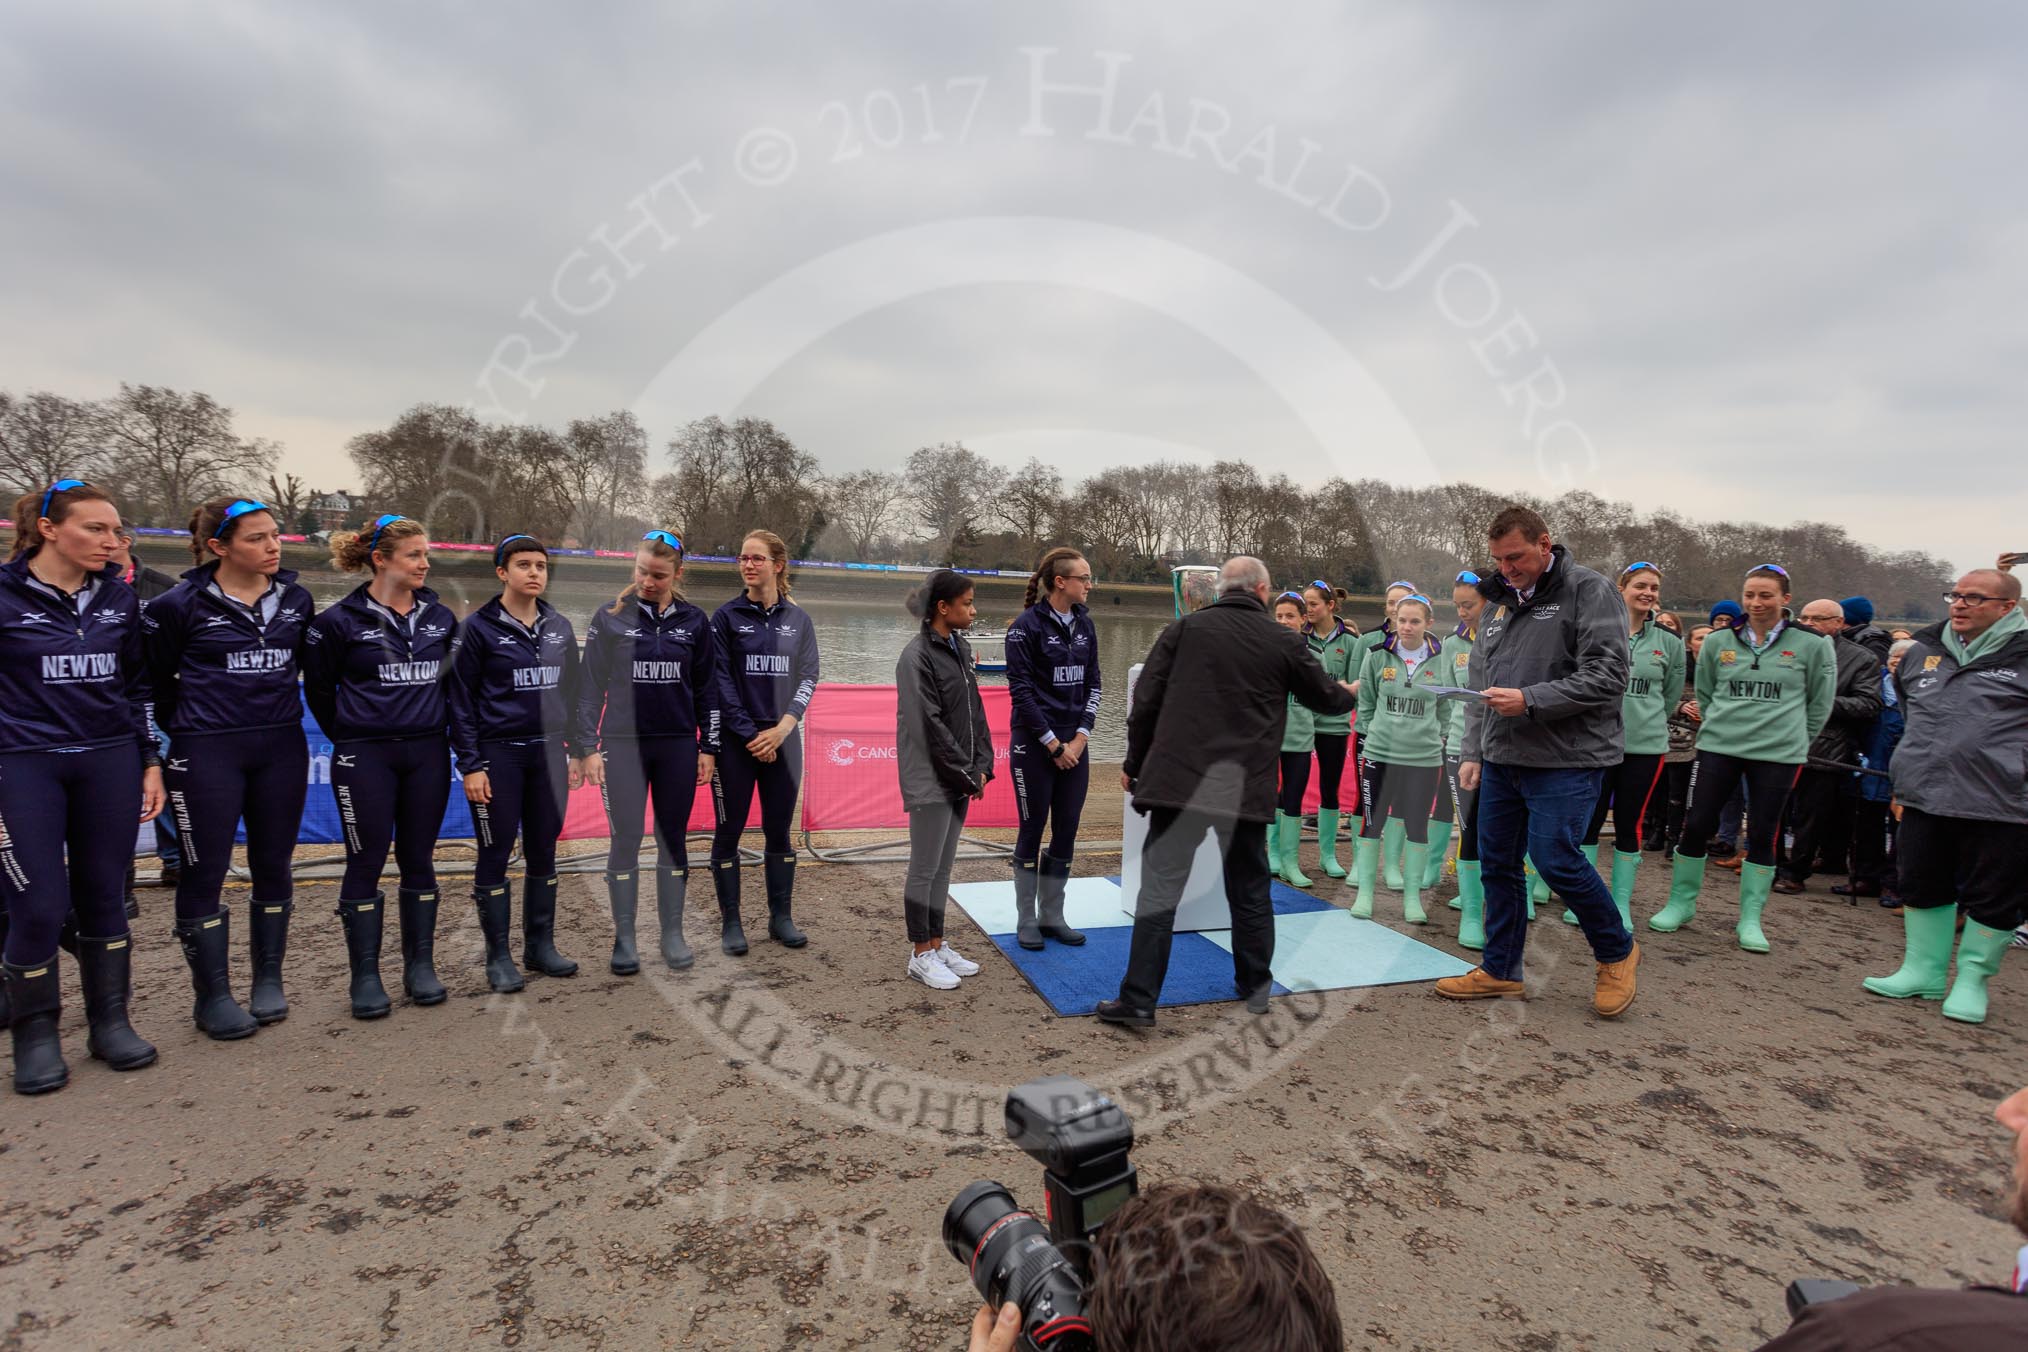 The Cancer Research UK Women's Boat Race 2018: The Women's Boat Race toss - Oxford on the left of the photo, Cambridge on the right, race umpire Sir Matthew Pinsent in front of Cambridge.
River Thames between Putney Bridge and Mortlake,
London SW15,

United Kingdom,
on 24 March 2018 at 14:40, image #31